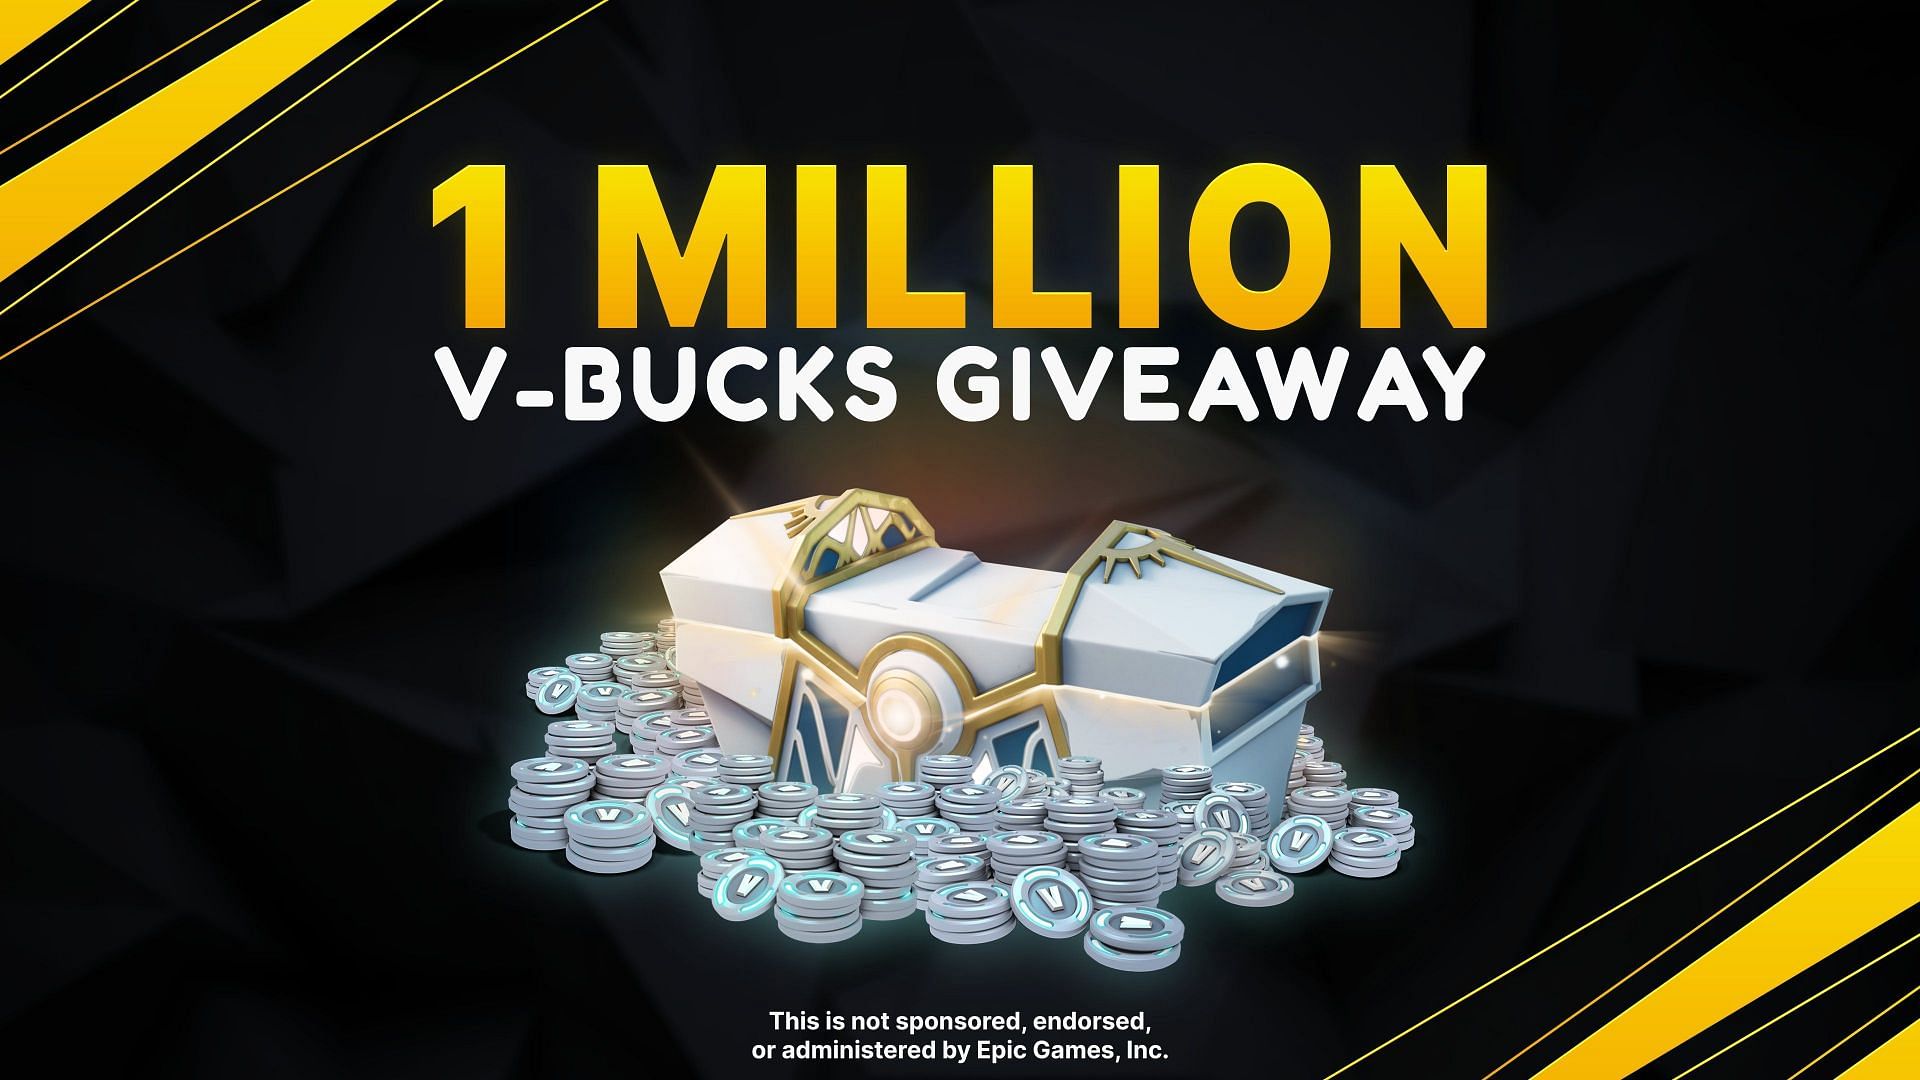 Fortnite Players Can Participate In V Bucks Giveaway Of 1 Million Here Is How